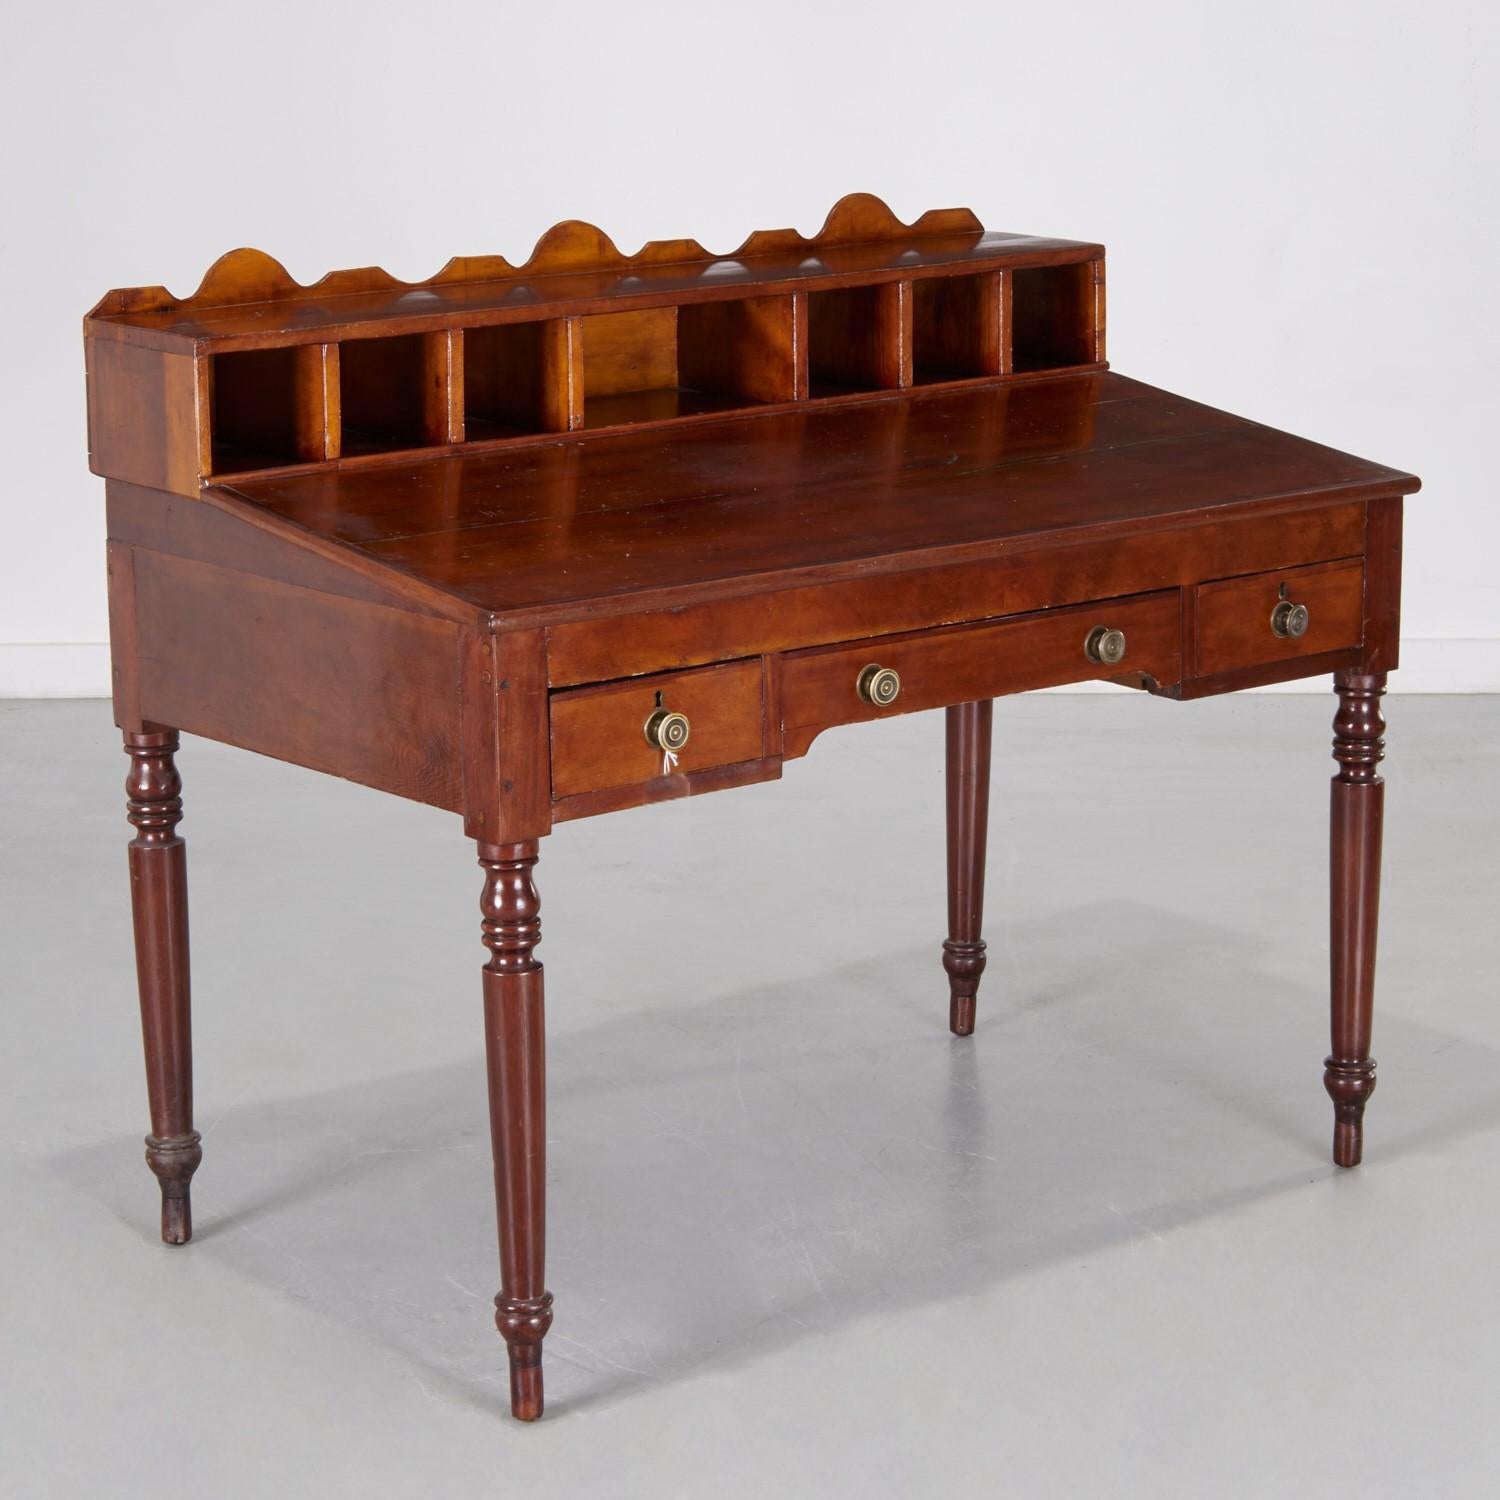 Hand-Crafted Unusual Antique American Sheraton Clerk's Desk with Gallery For Sale